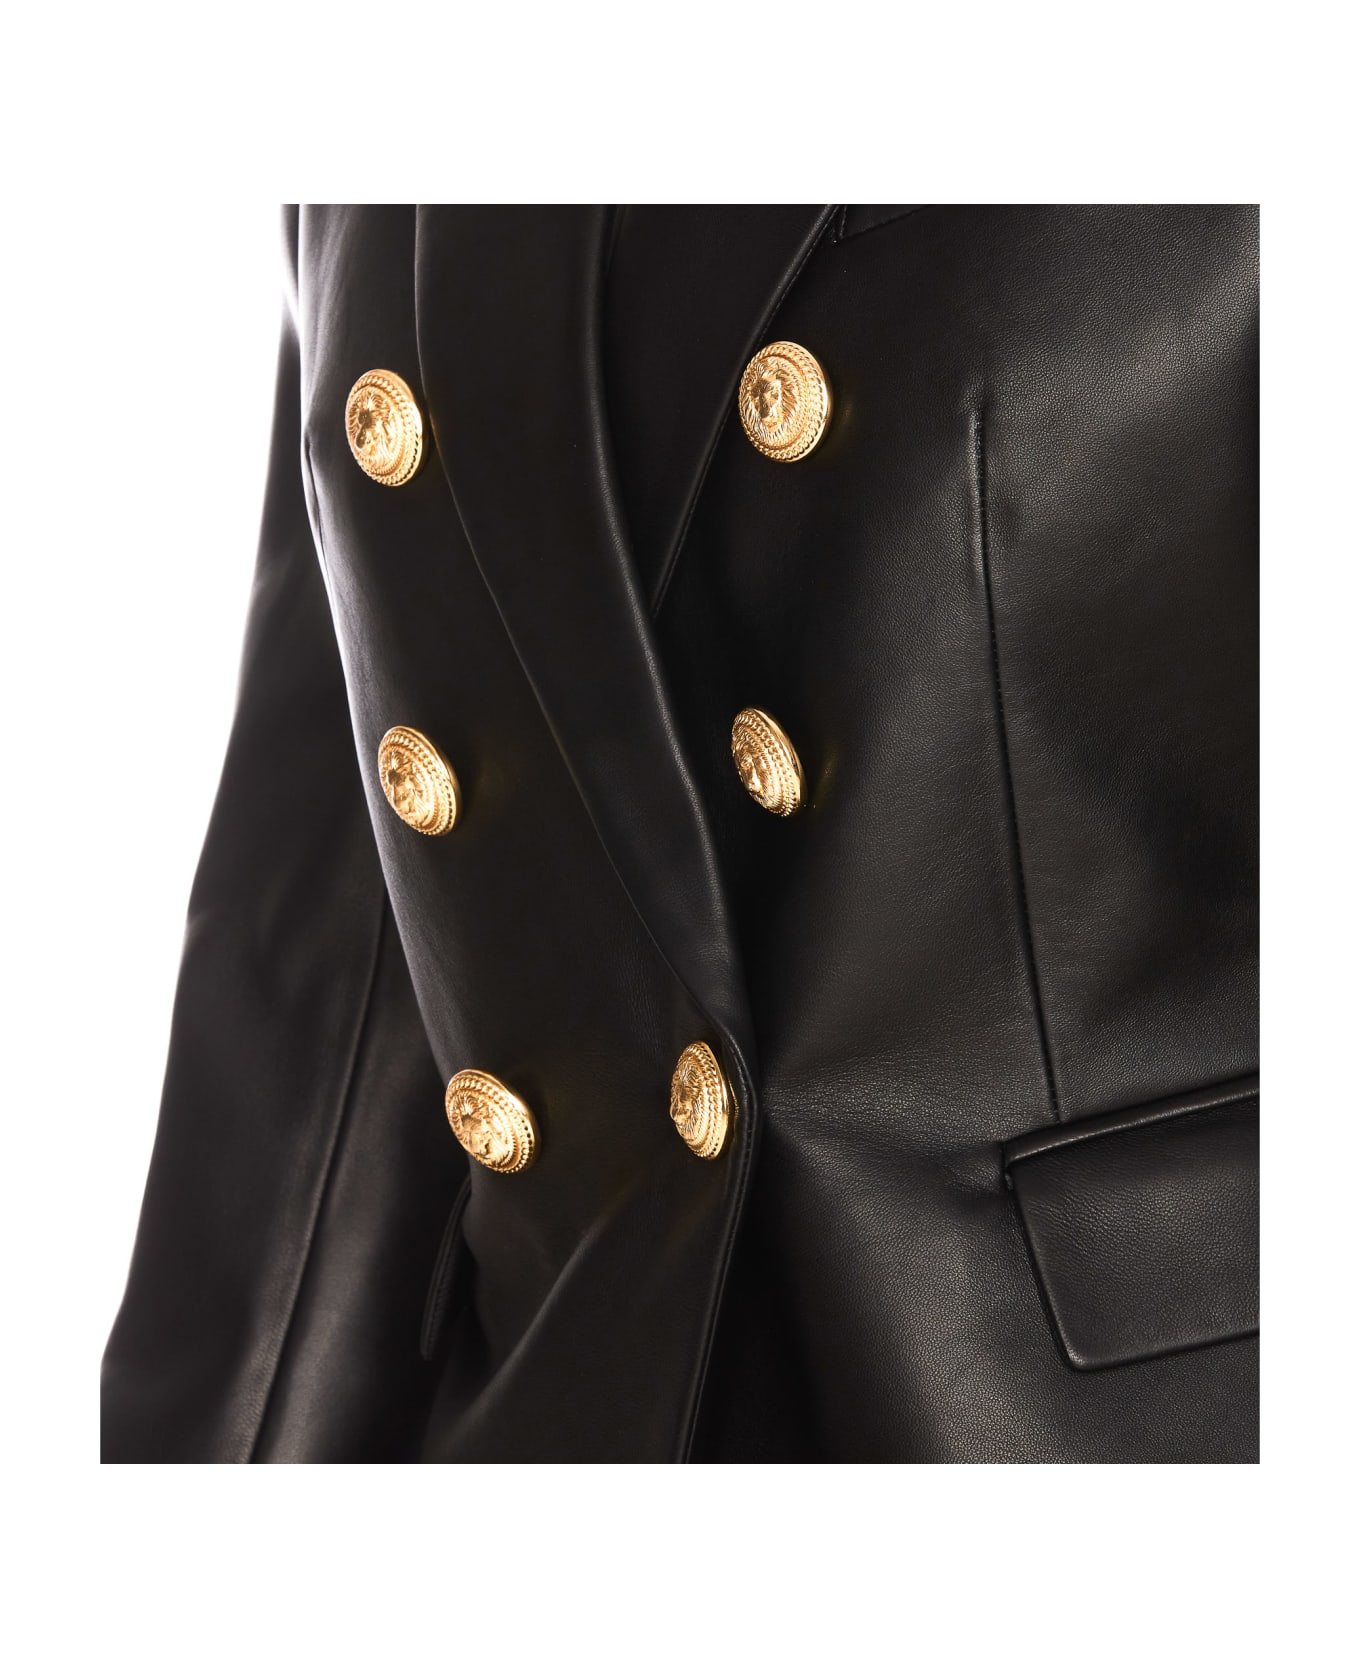 Balmain 6 Buttons Classic Leather Jacket - Black ブレザー